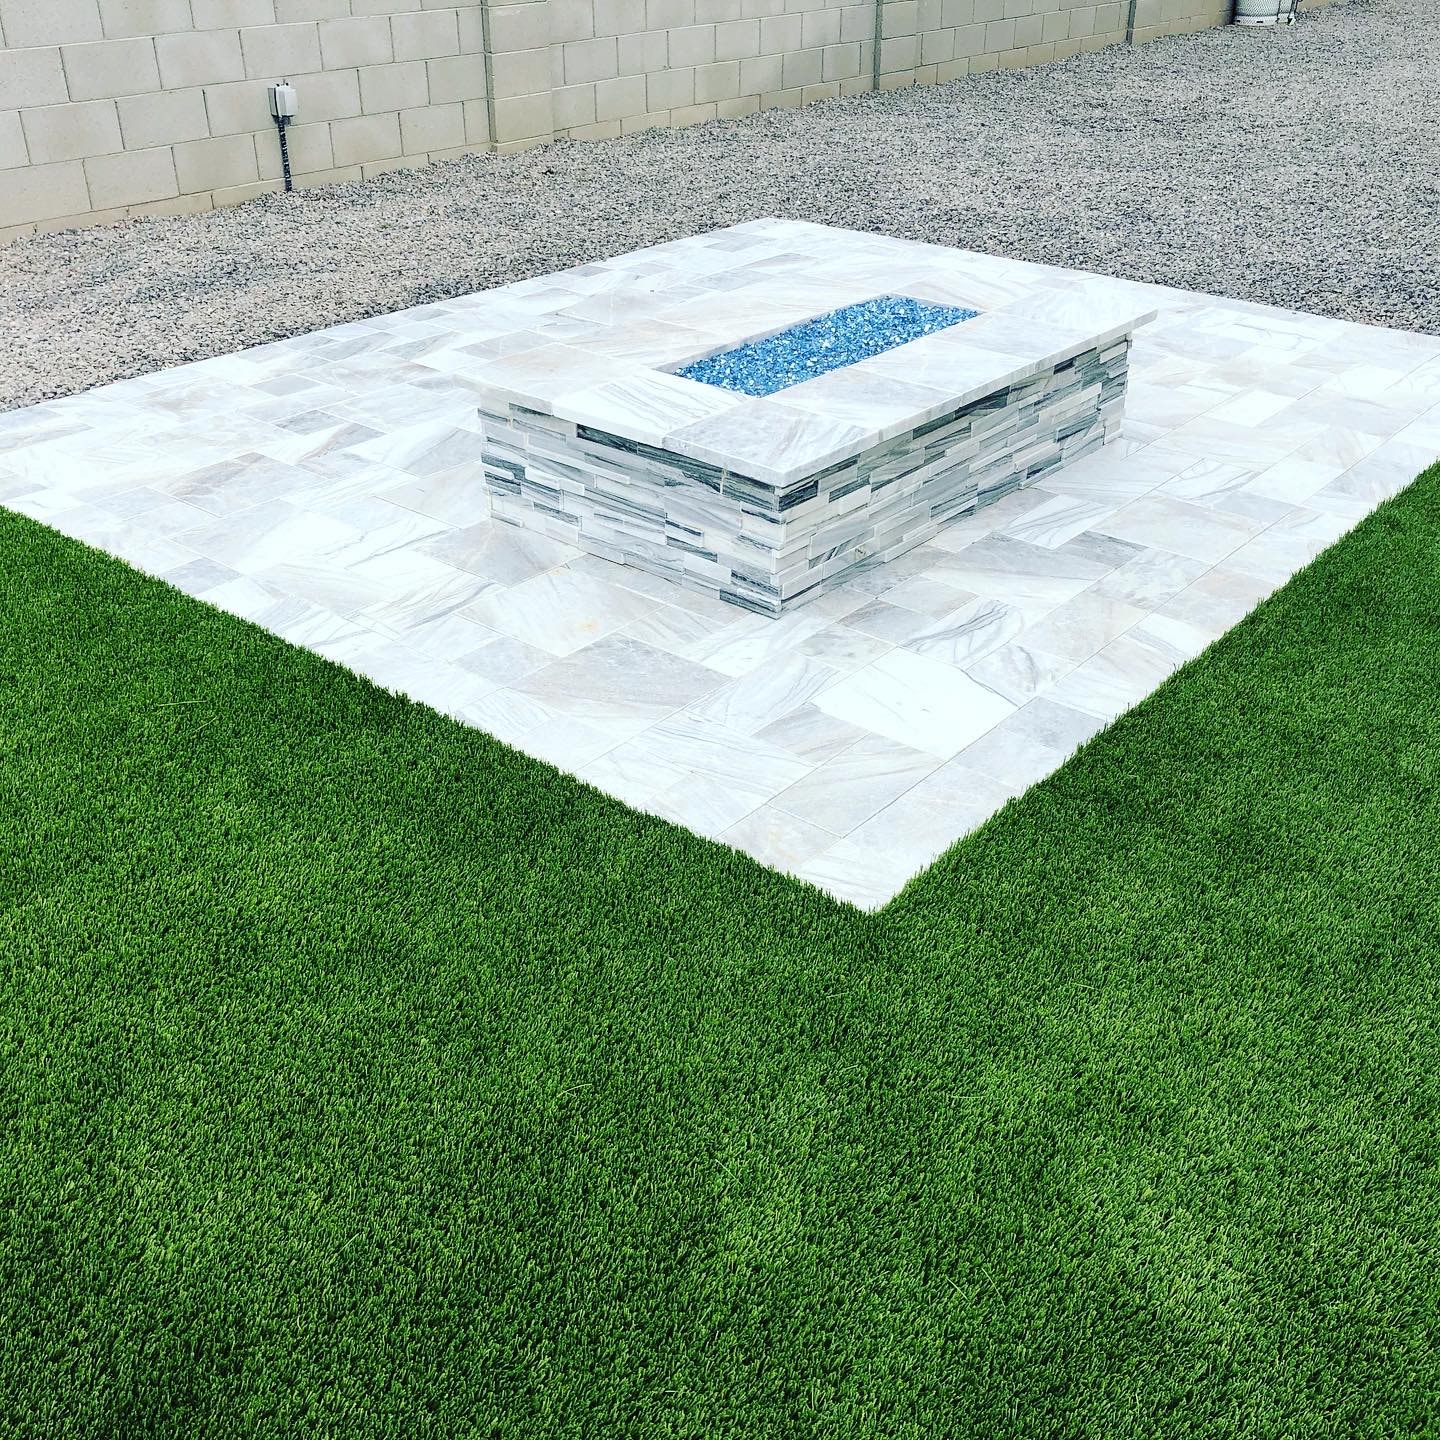 Fire pit in Arizona surrounded but artificial turf